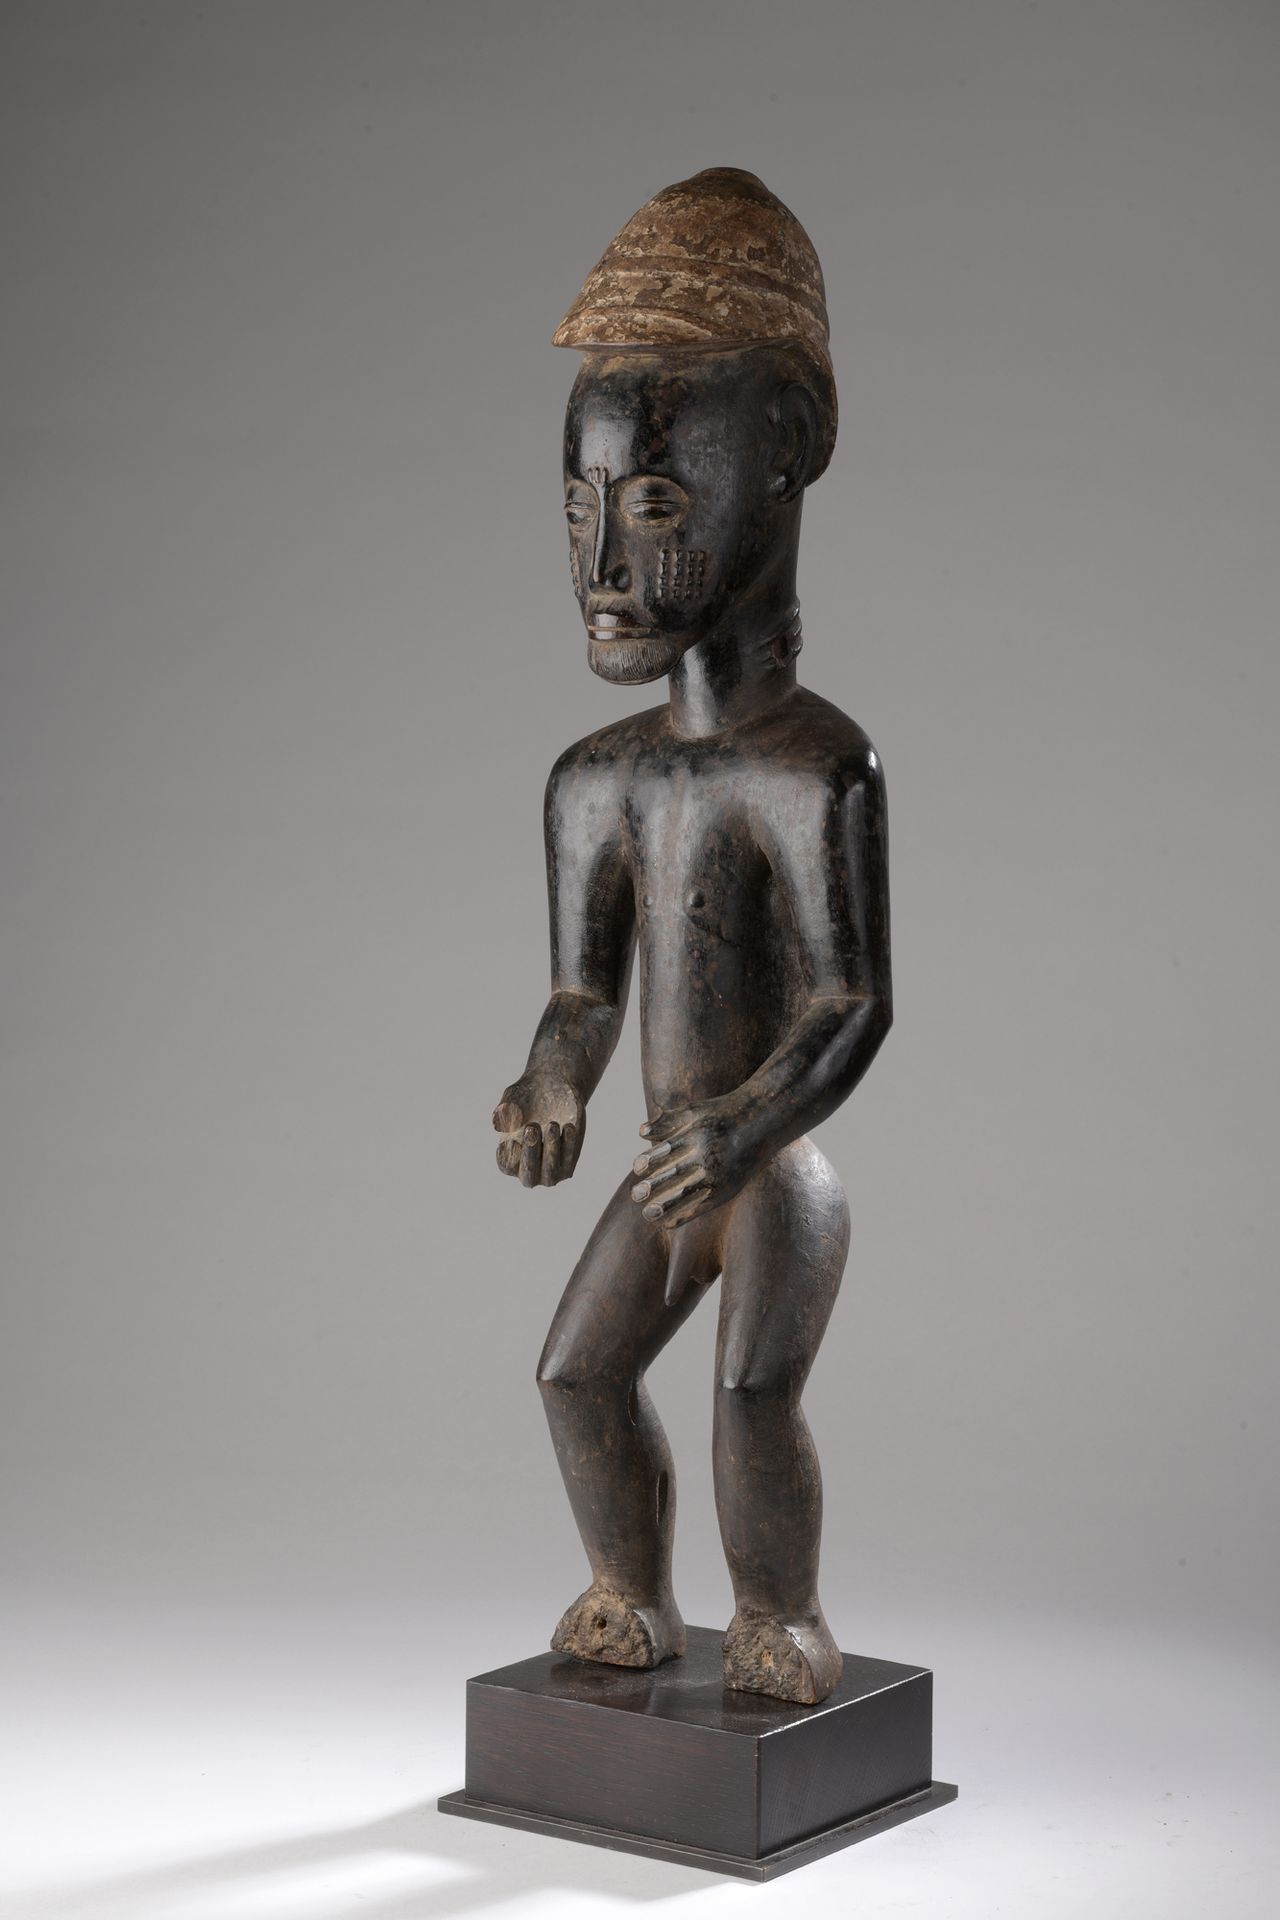 Null BAOULE STATUE, Ivory Coast

Wood with a brownish-black patina in places, pi&hellip;